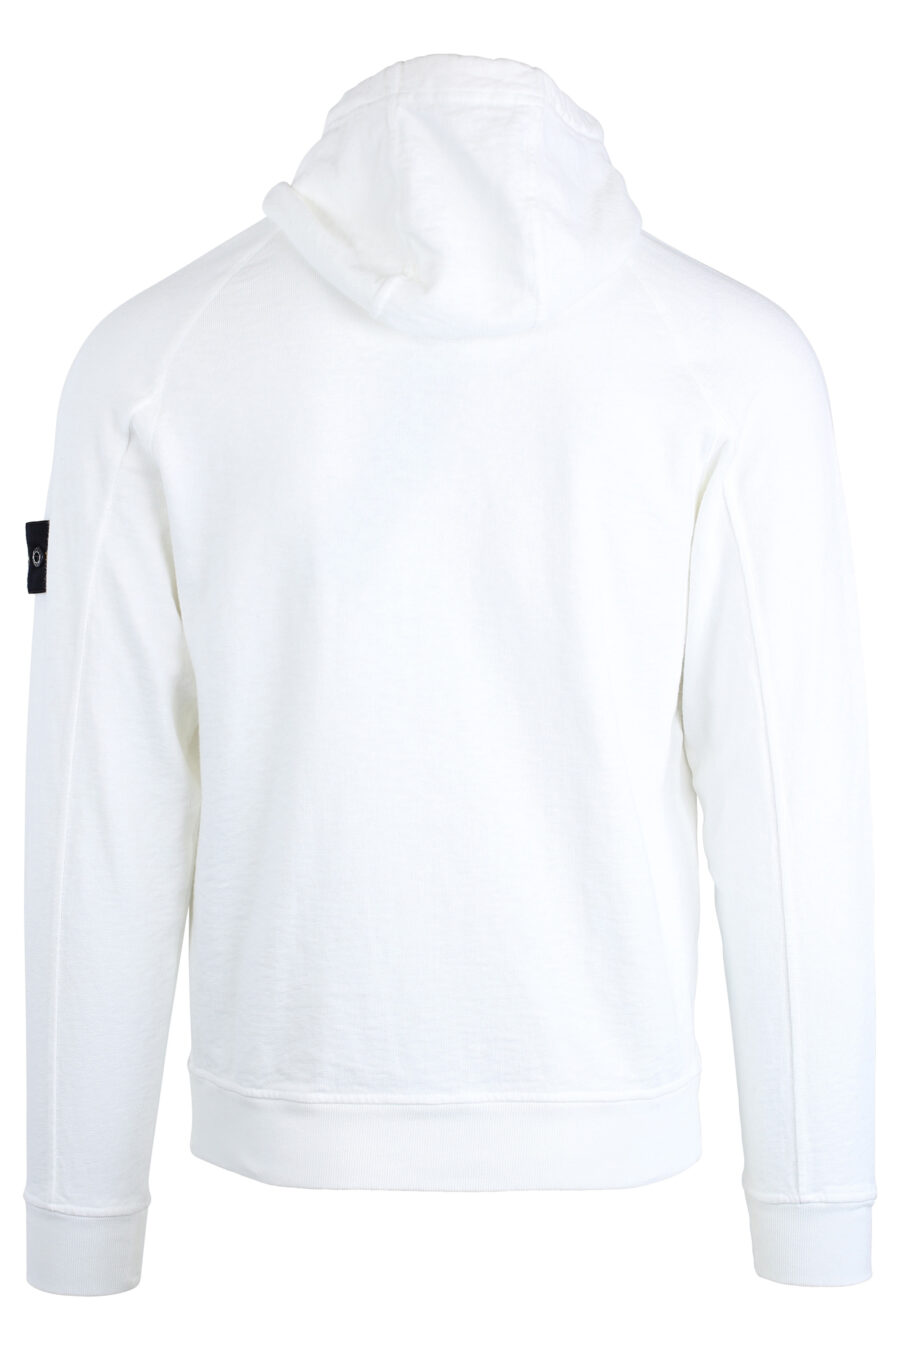 White sweatshirt with hood and patch - IMG 1680